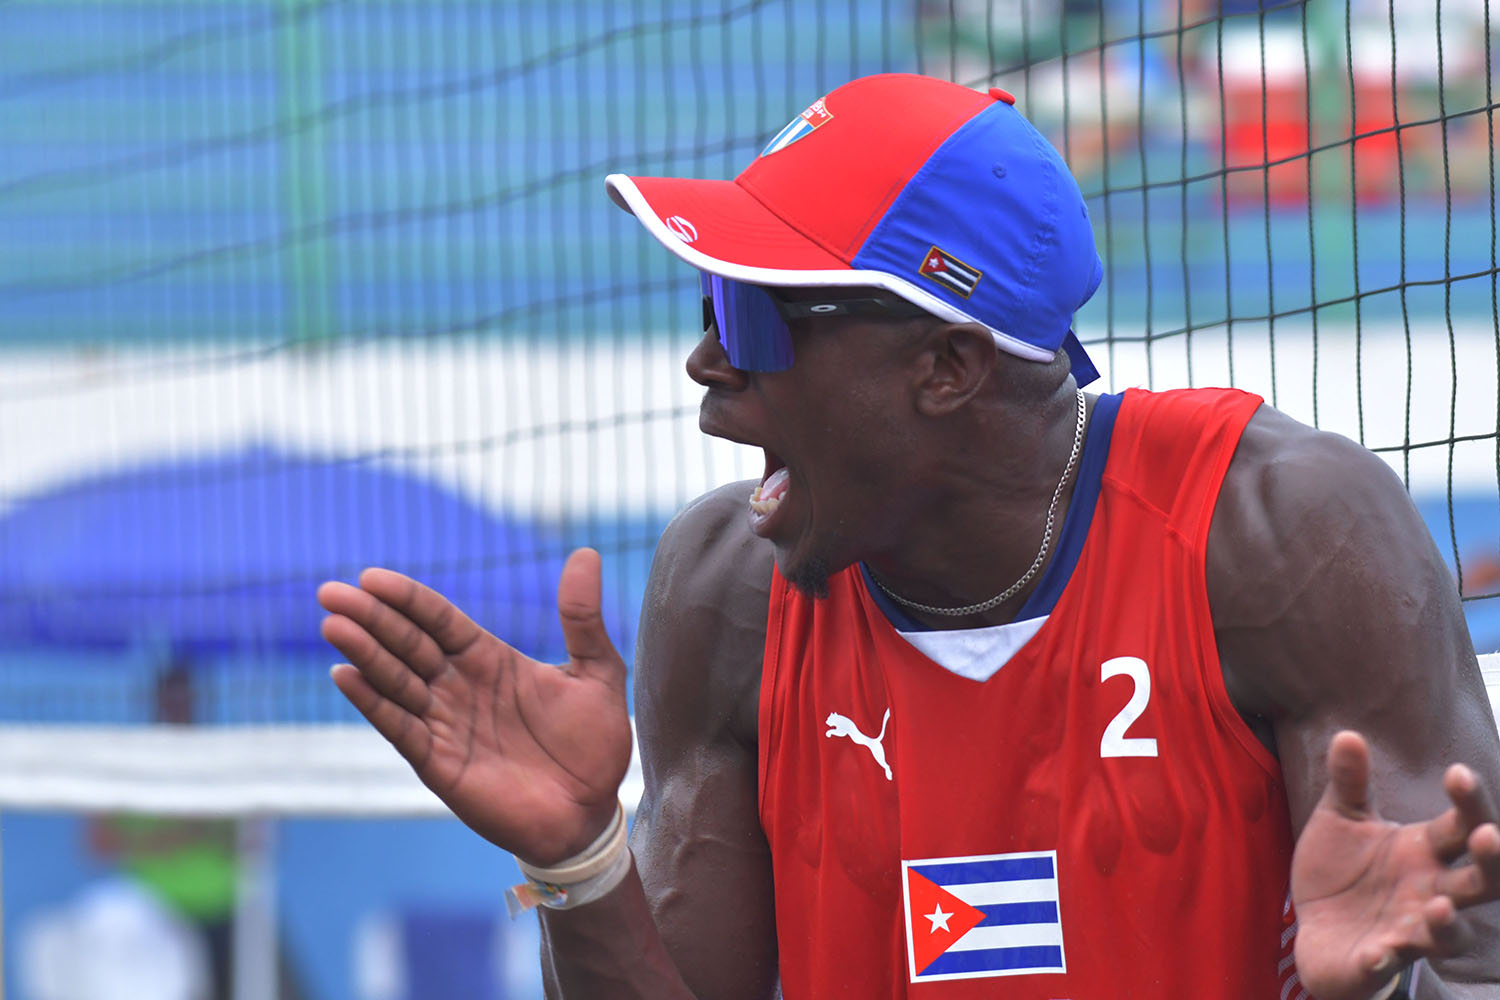 Exciting Men’s Beach Volleyball semifinals at the CAC Games